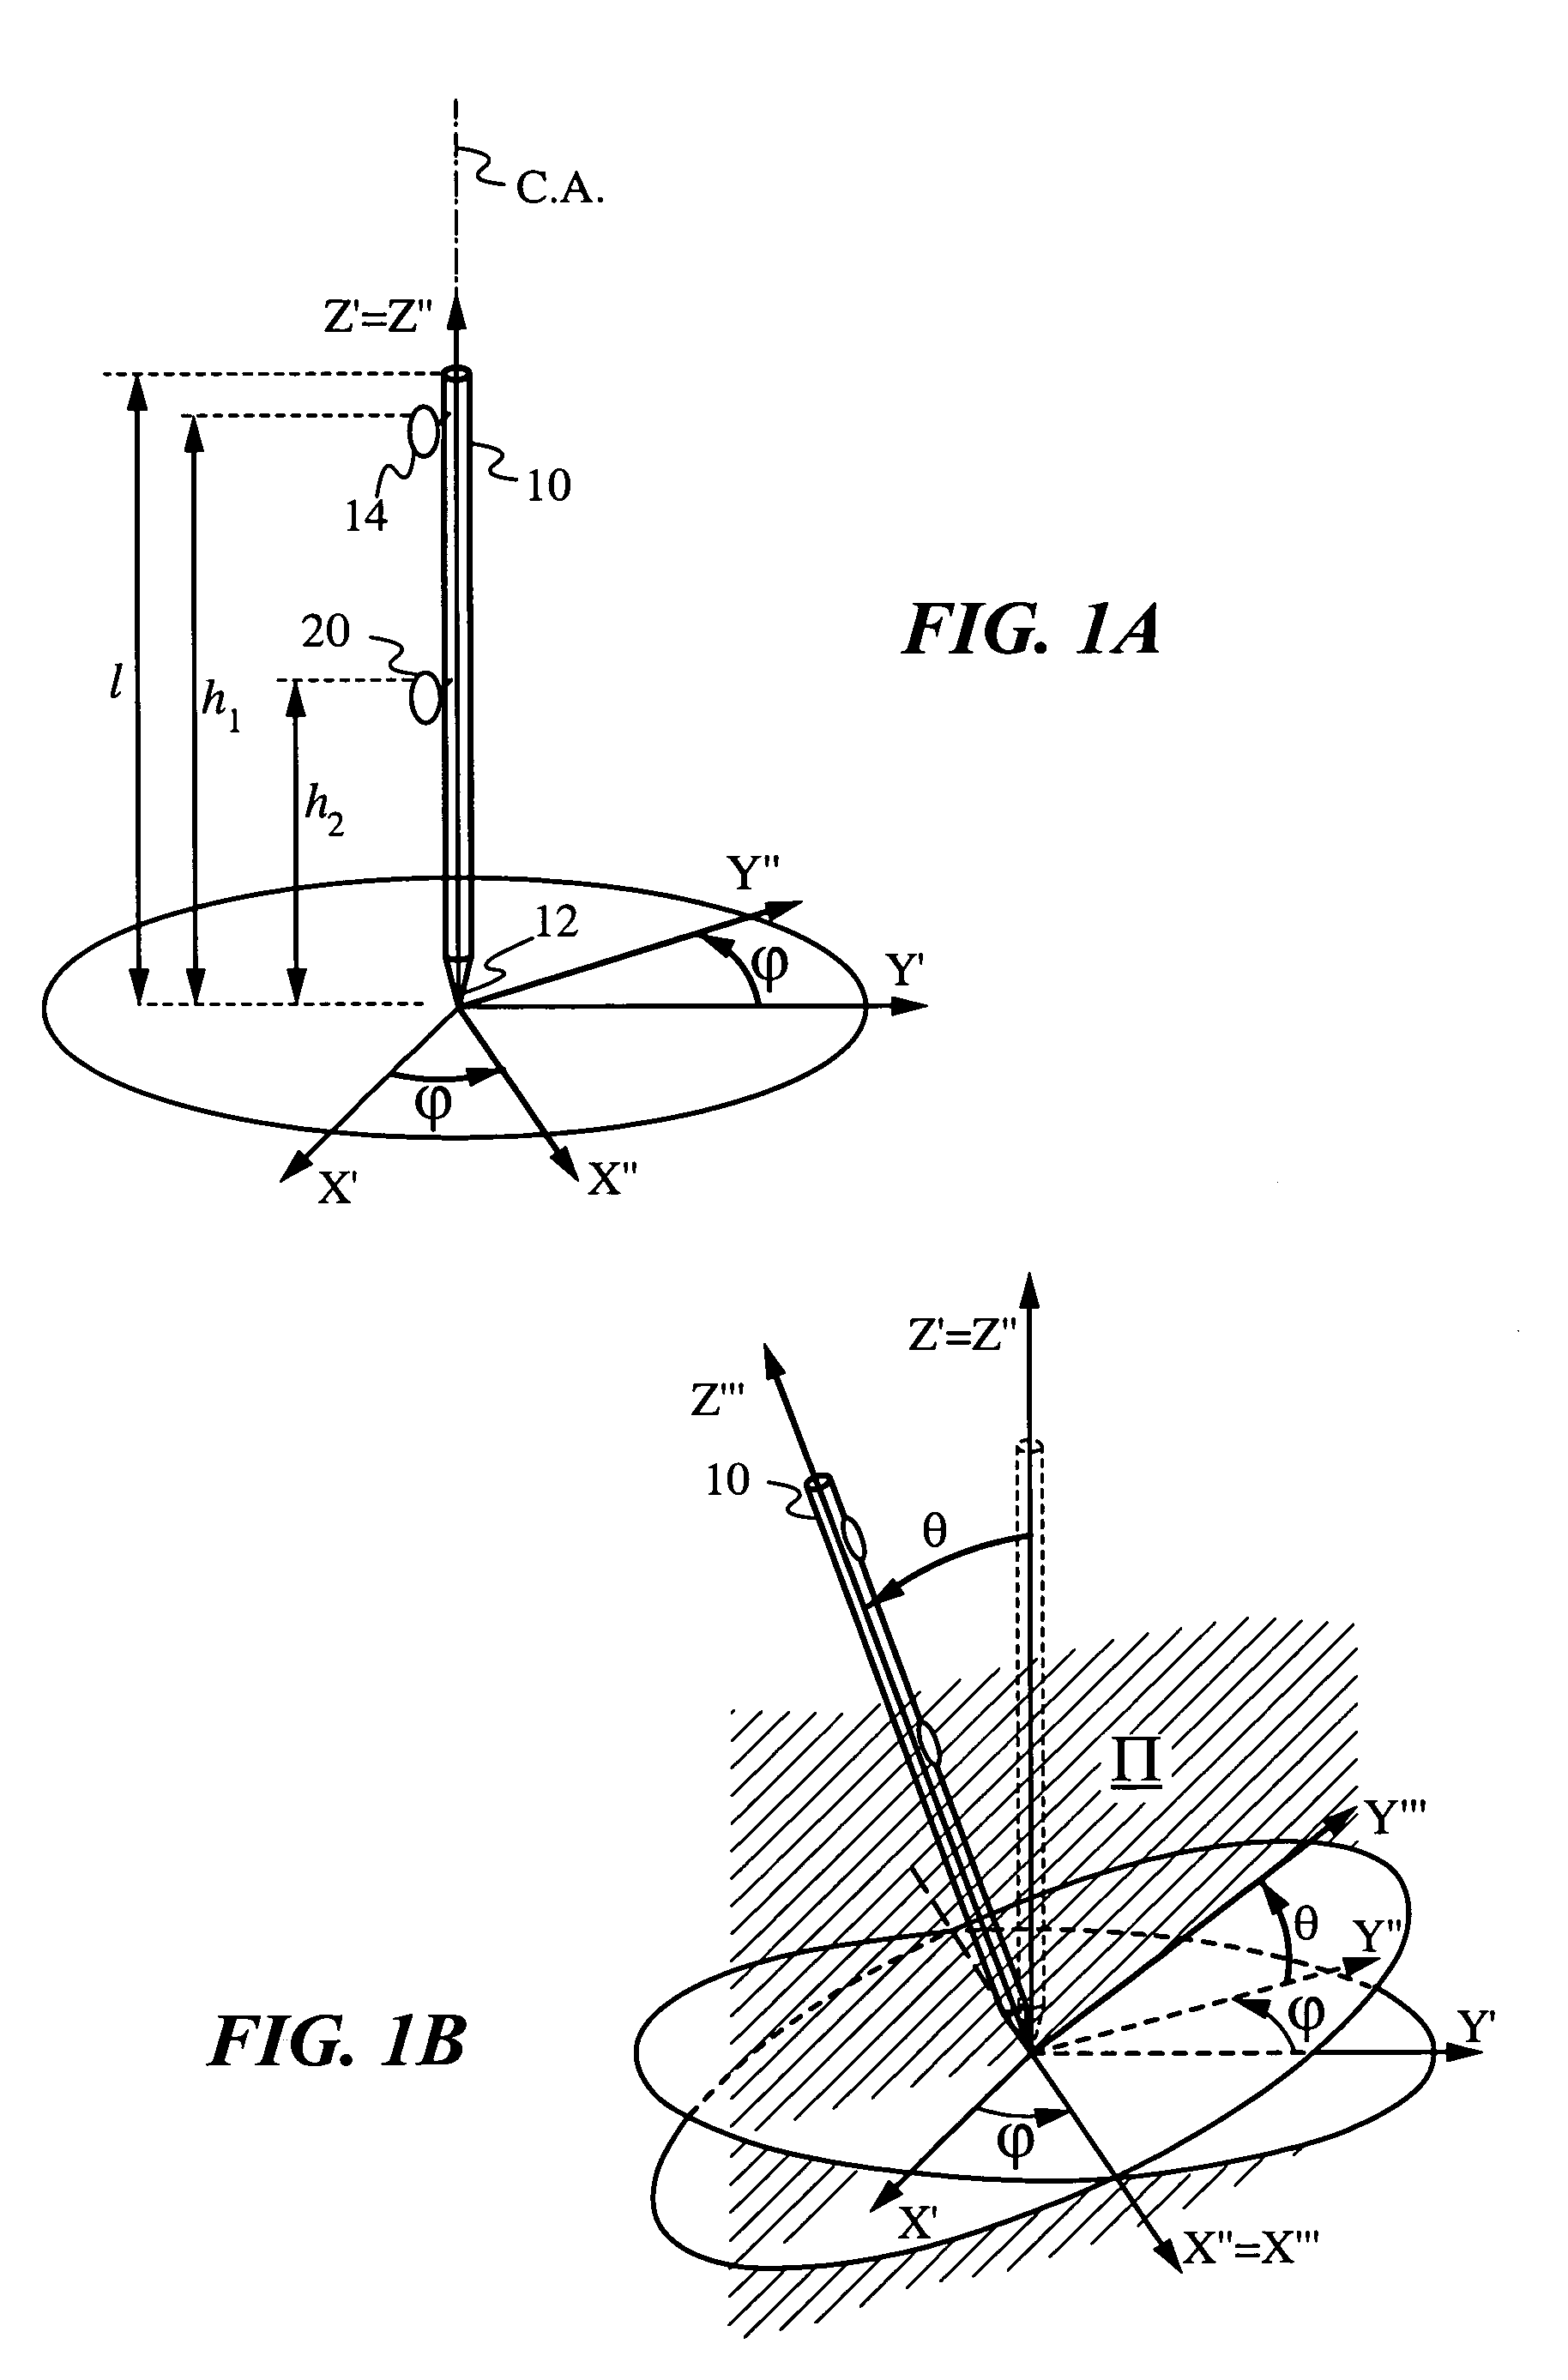 Determination of an orientation parameter of an elongate object with a scan beam apparatus